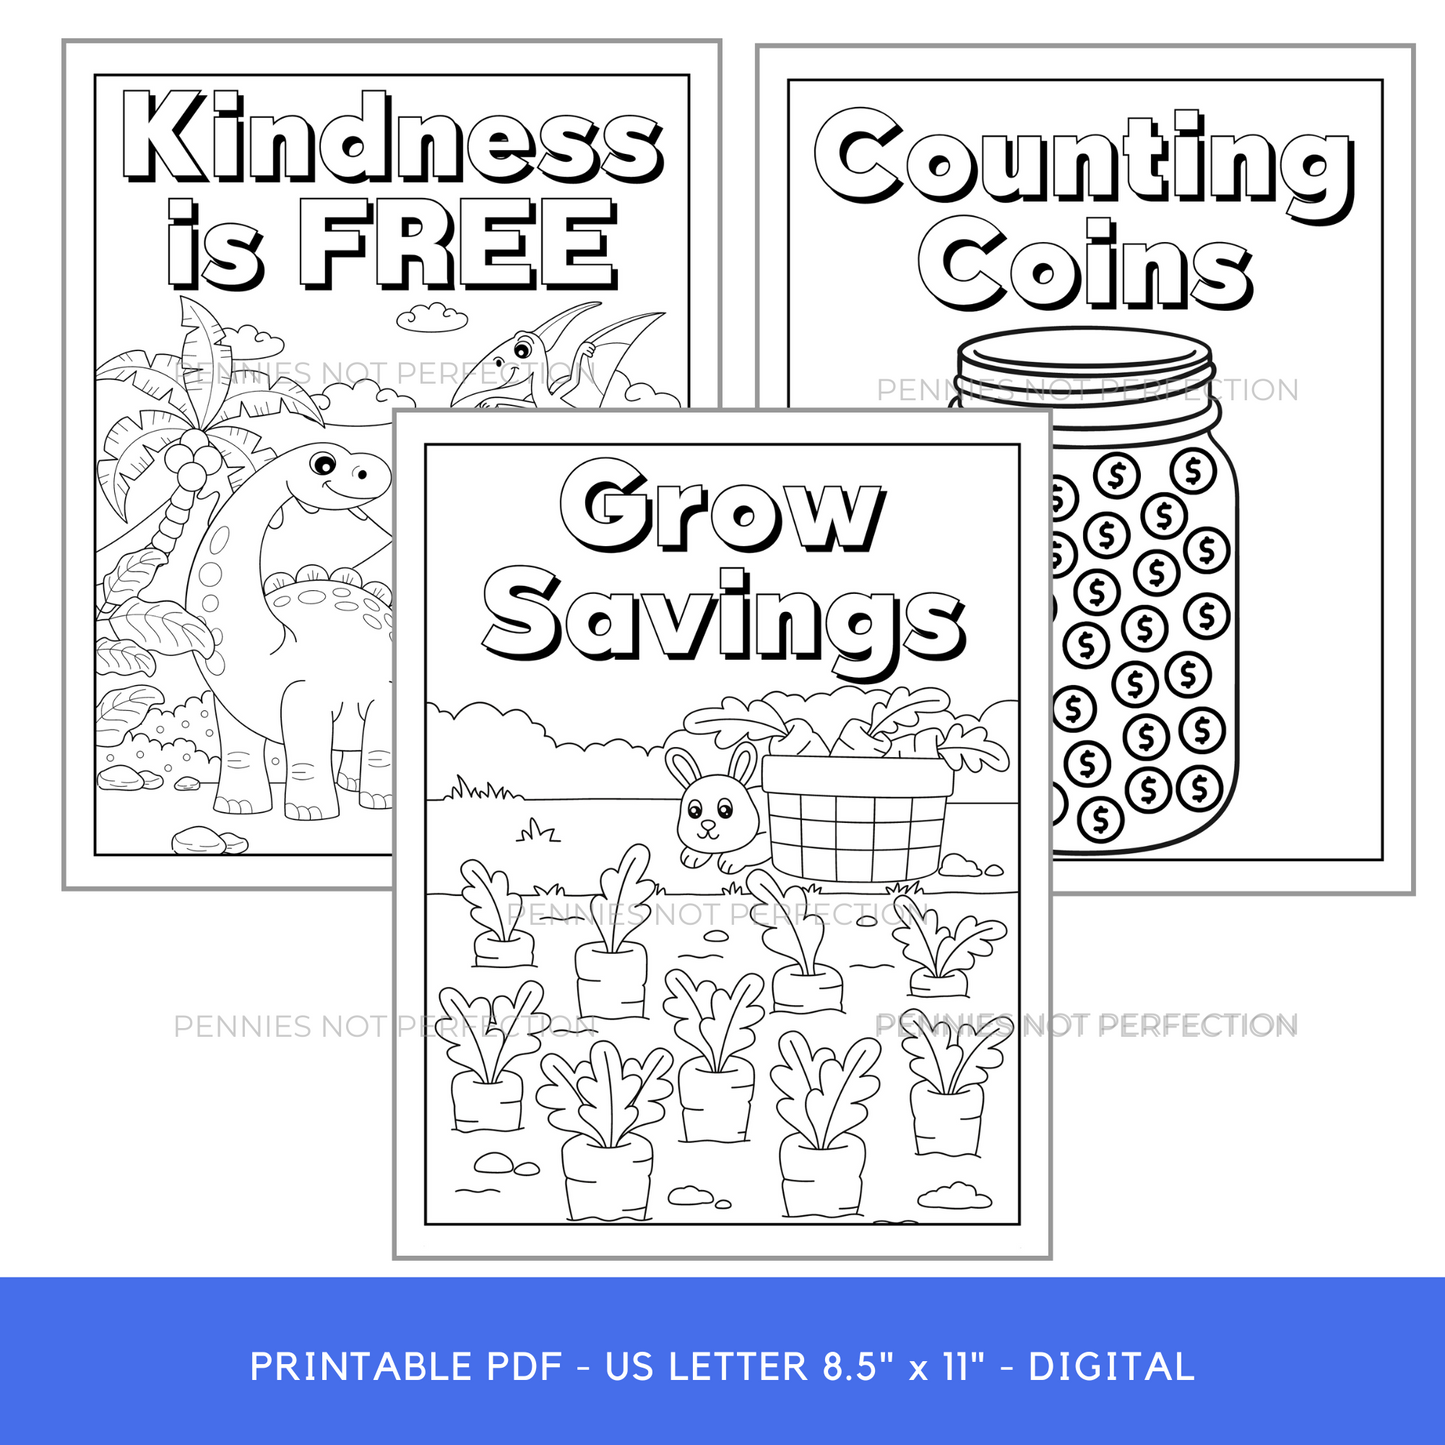 Money Coloring Book For Kids (35 CUTE Money Coloring Sheets)